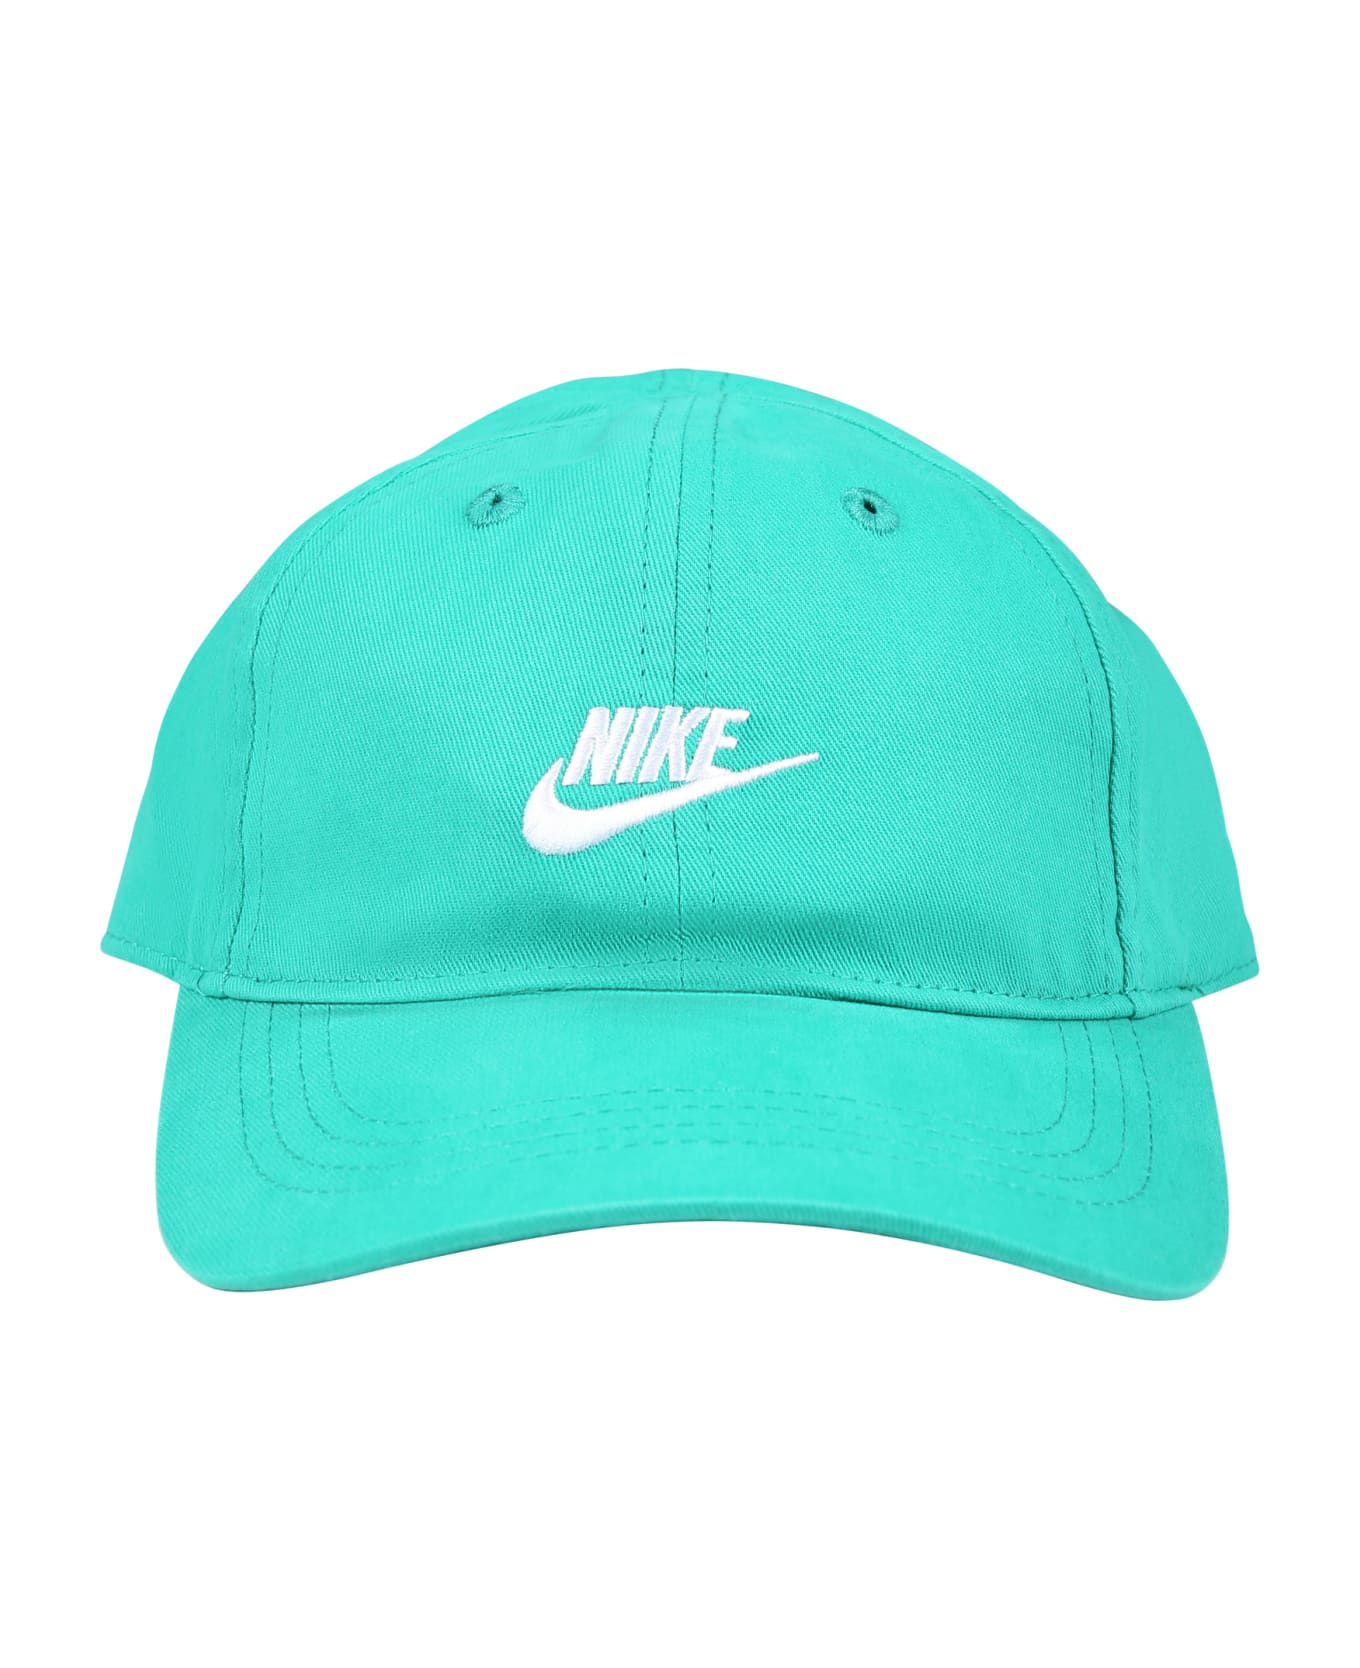 Nike Green Hat With Visor For Kids With The Iconic Swoosh - Green